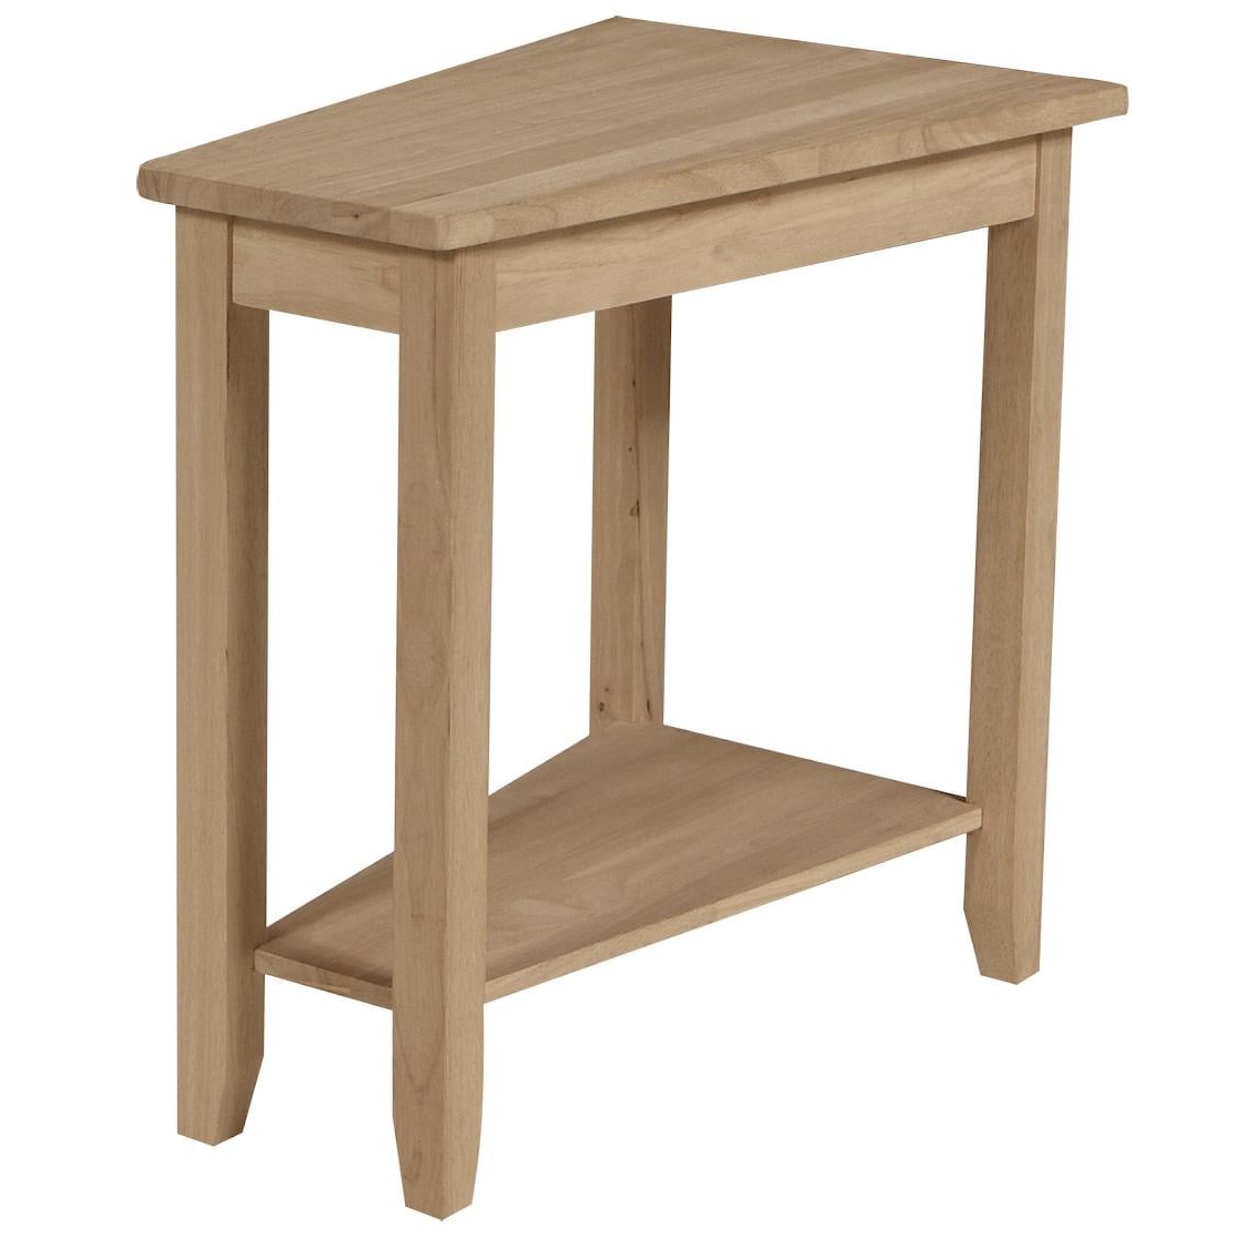 John Thomas SELECT Occasional & Accents Keystone End Table